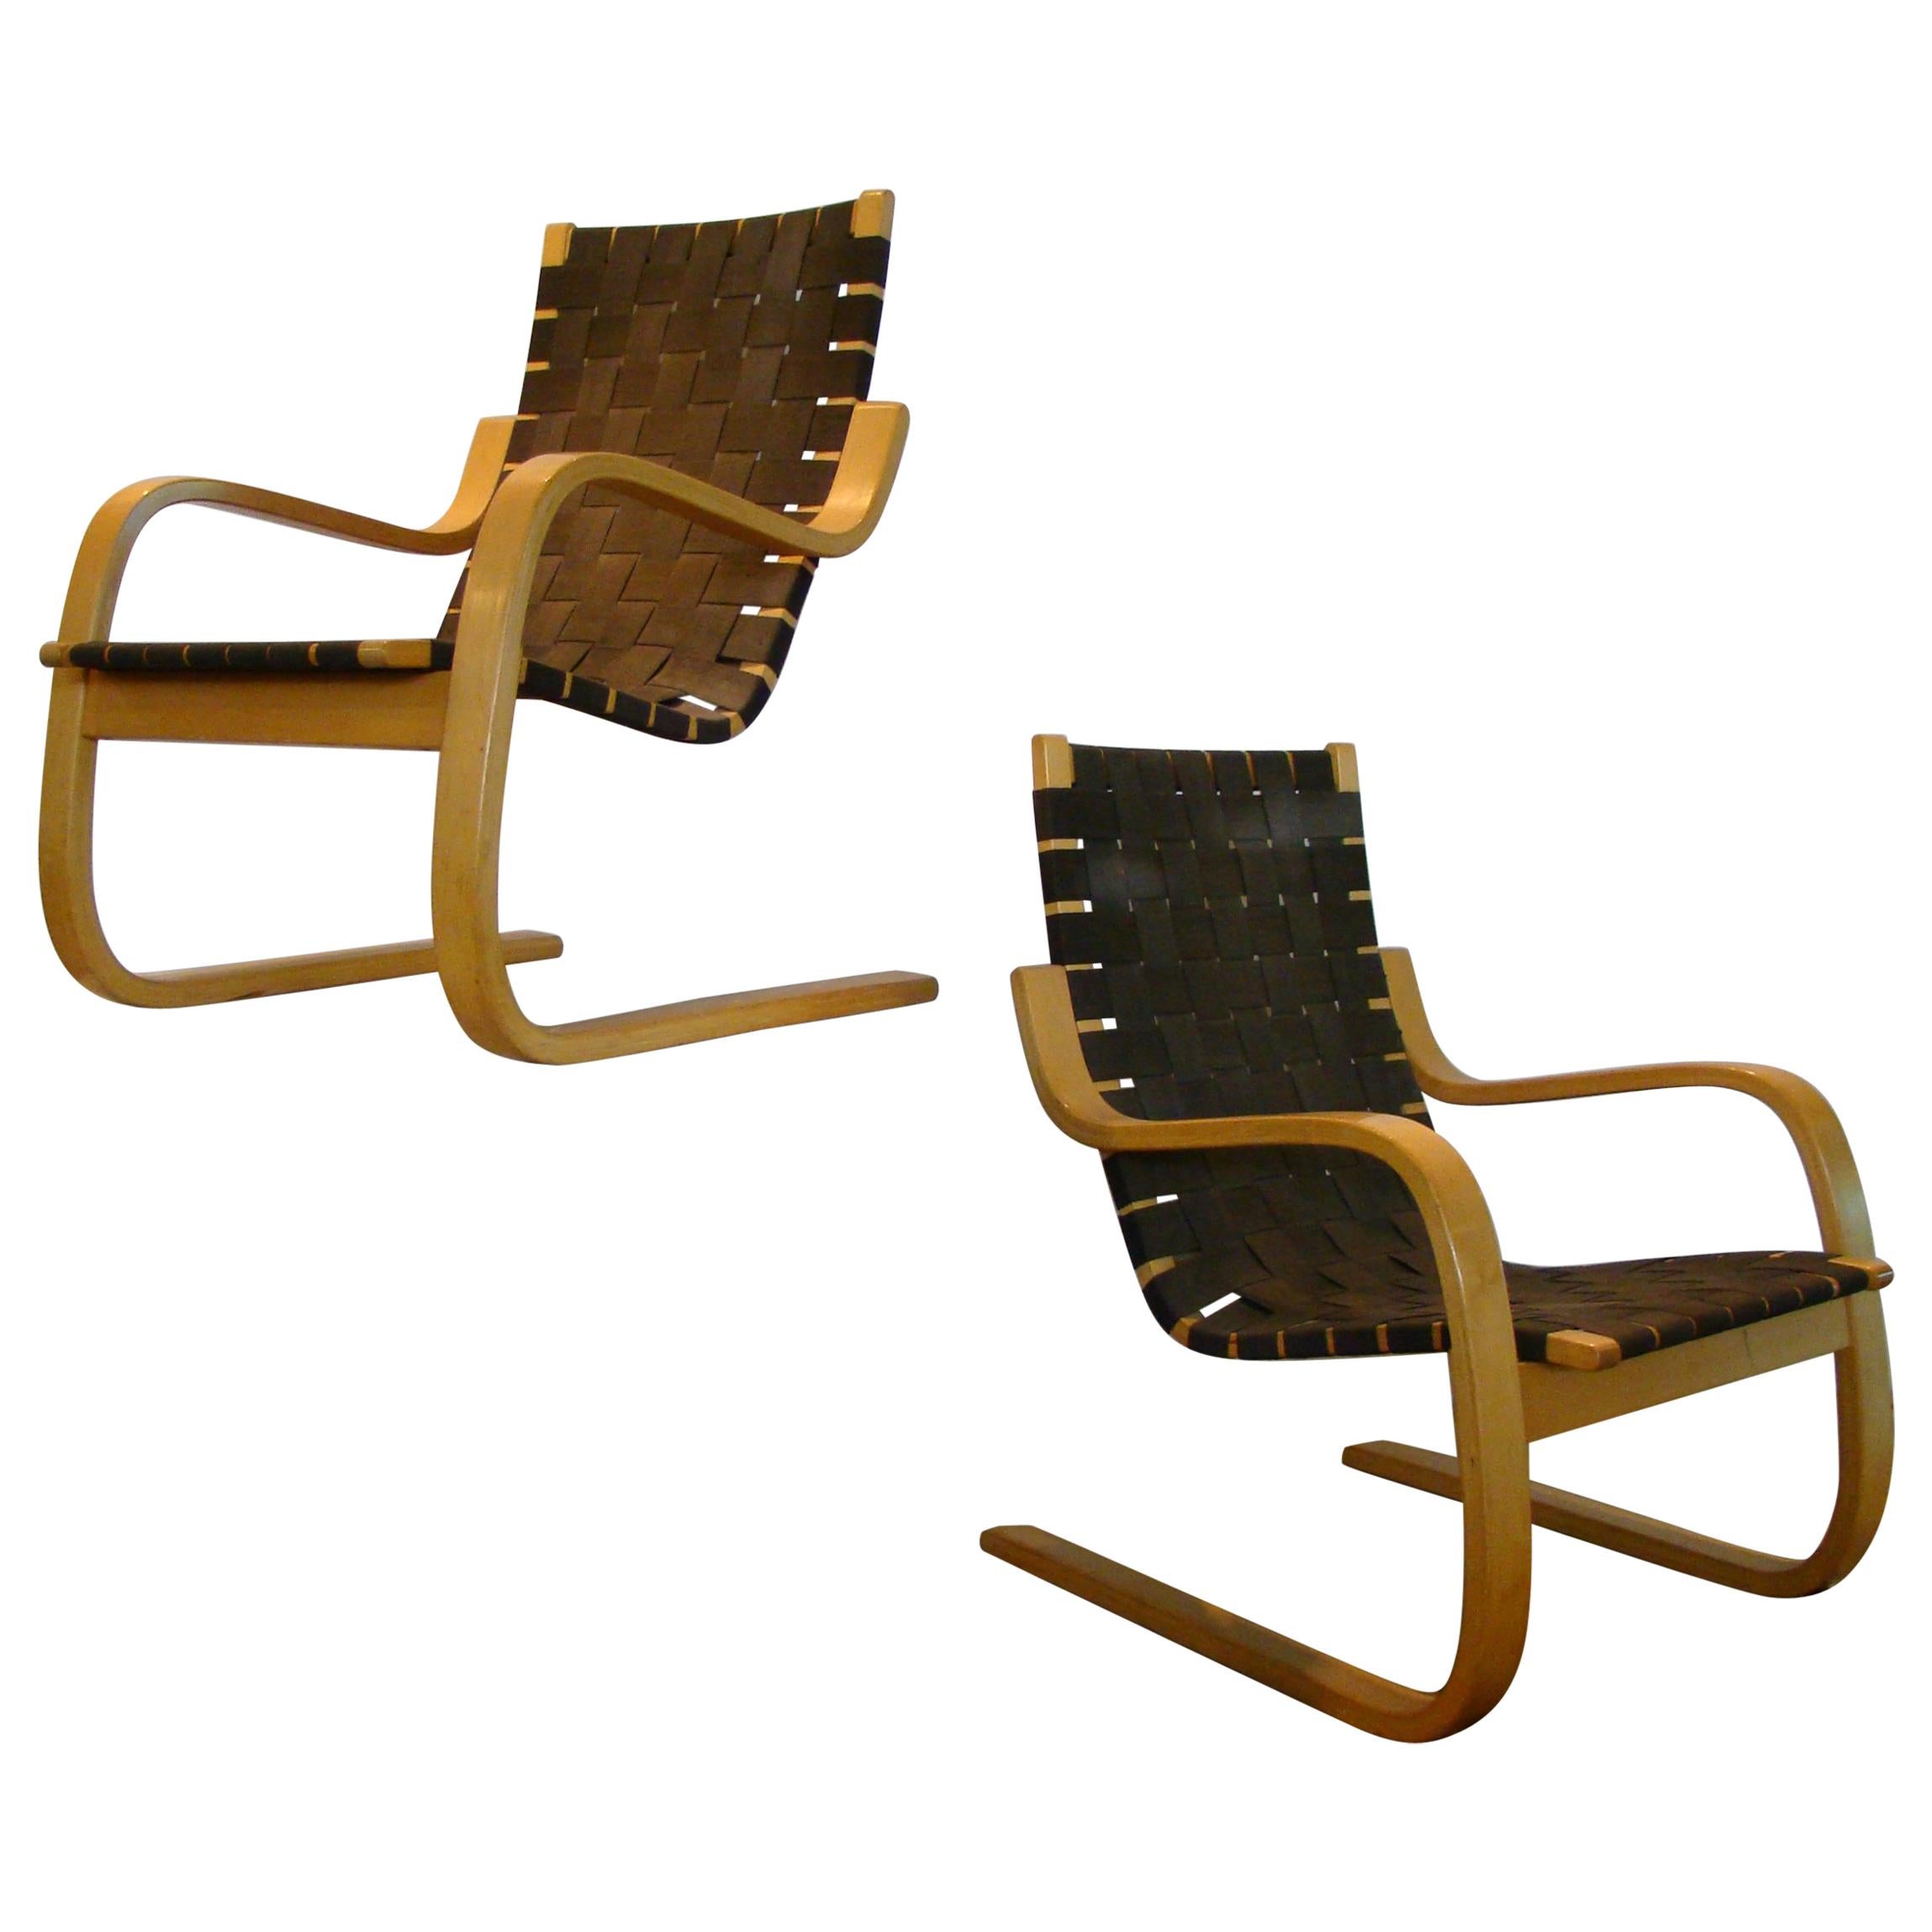 Model #406 Armchairs Pair by Alvar Aalto, Made in Finland for ICF